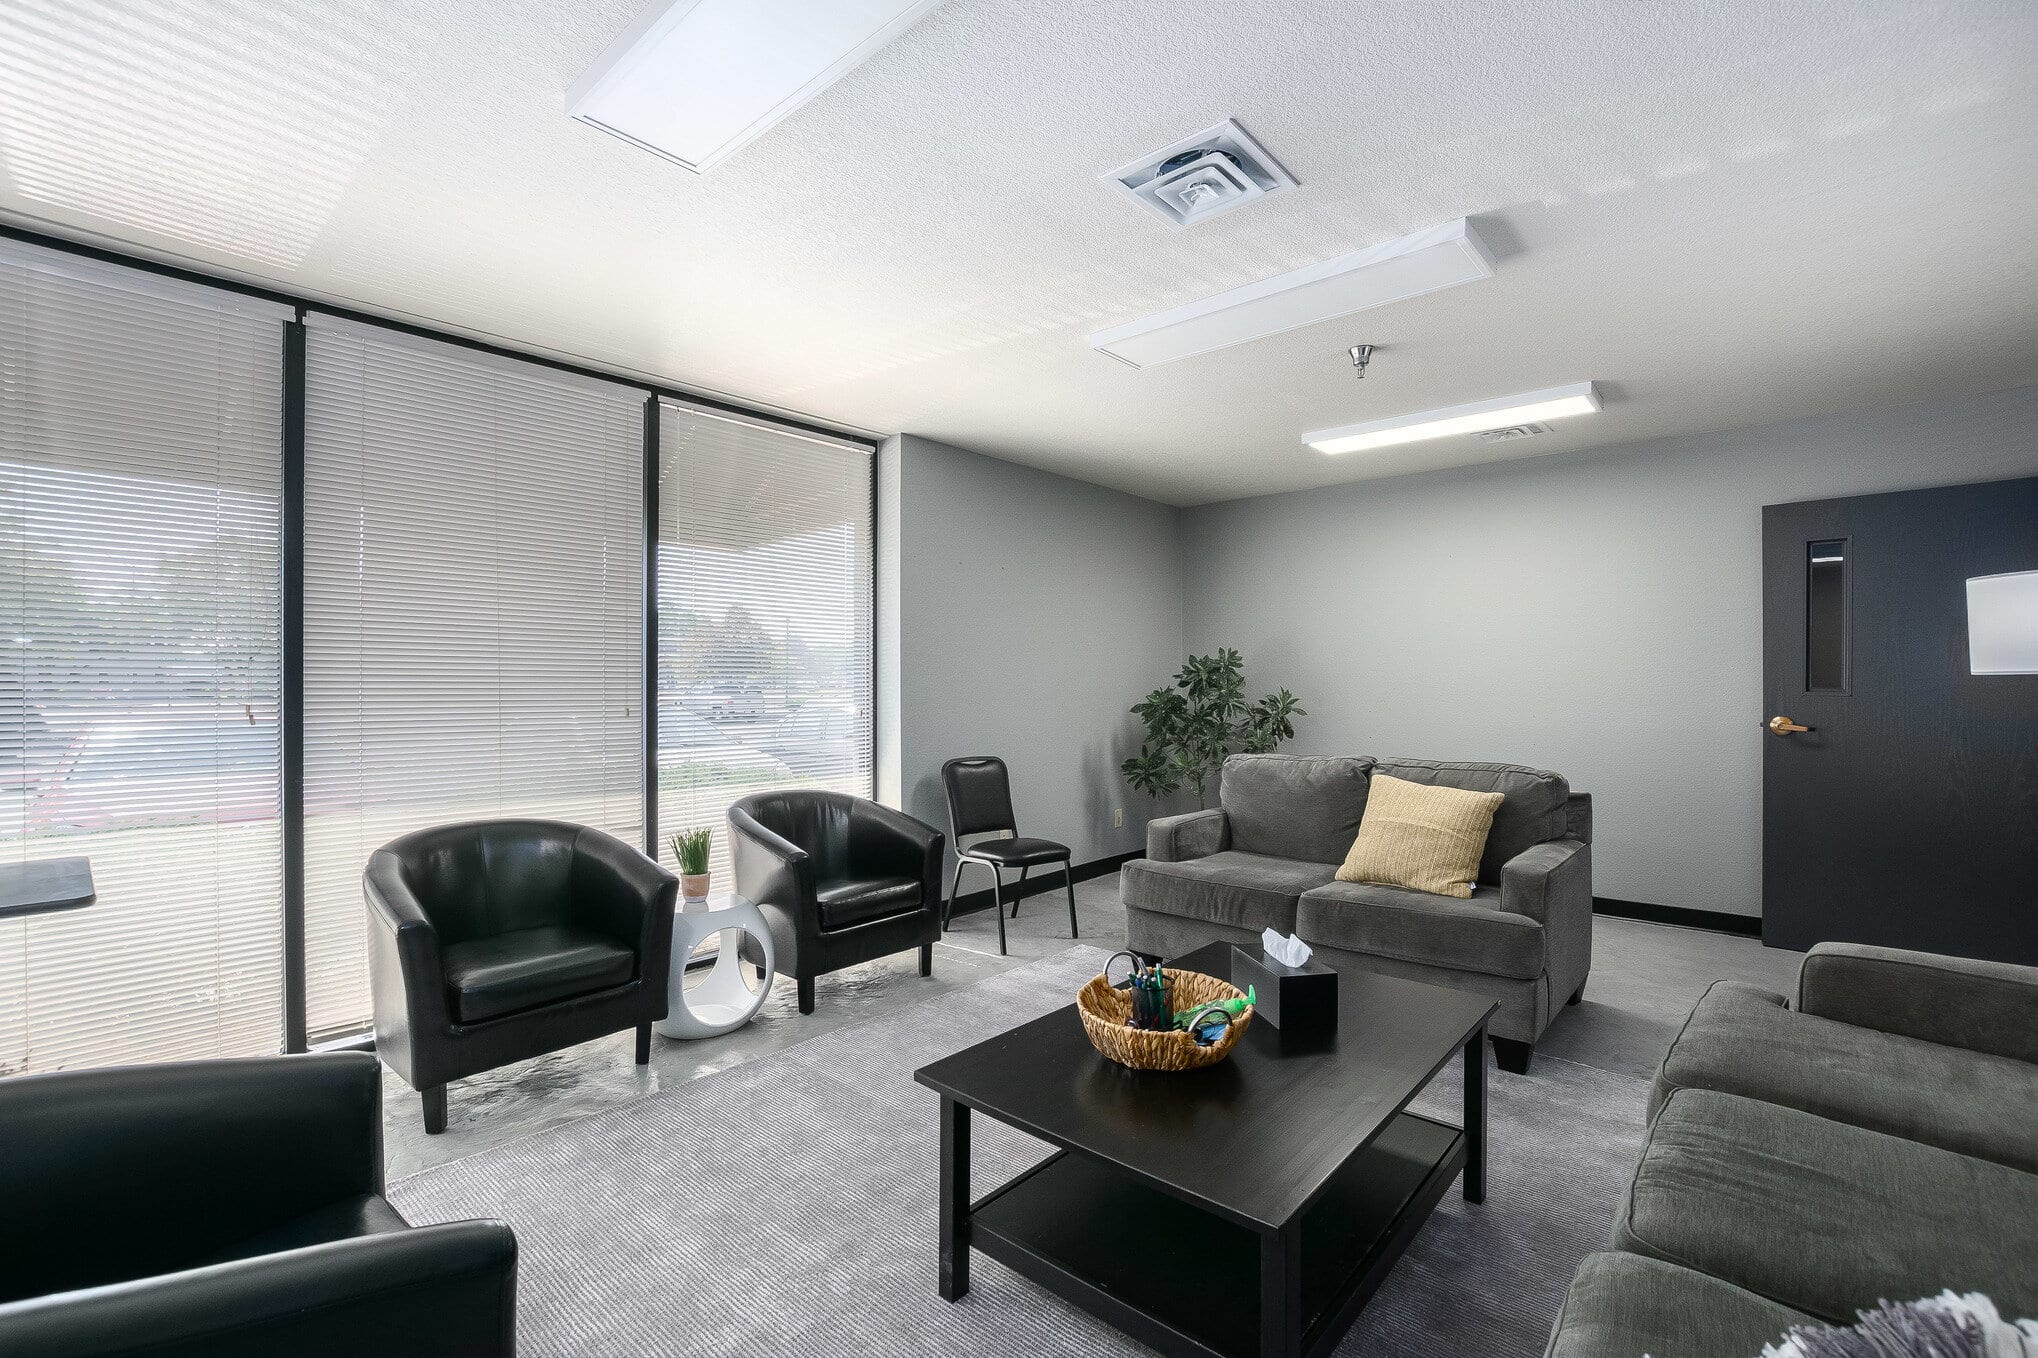 Office waiting room with black chairs and large windows